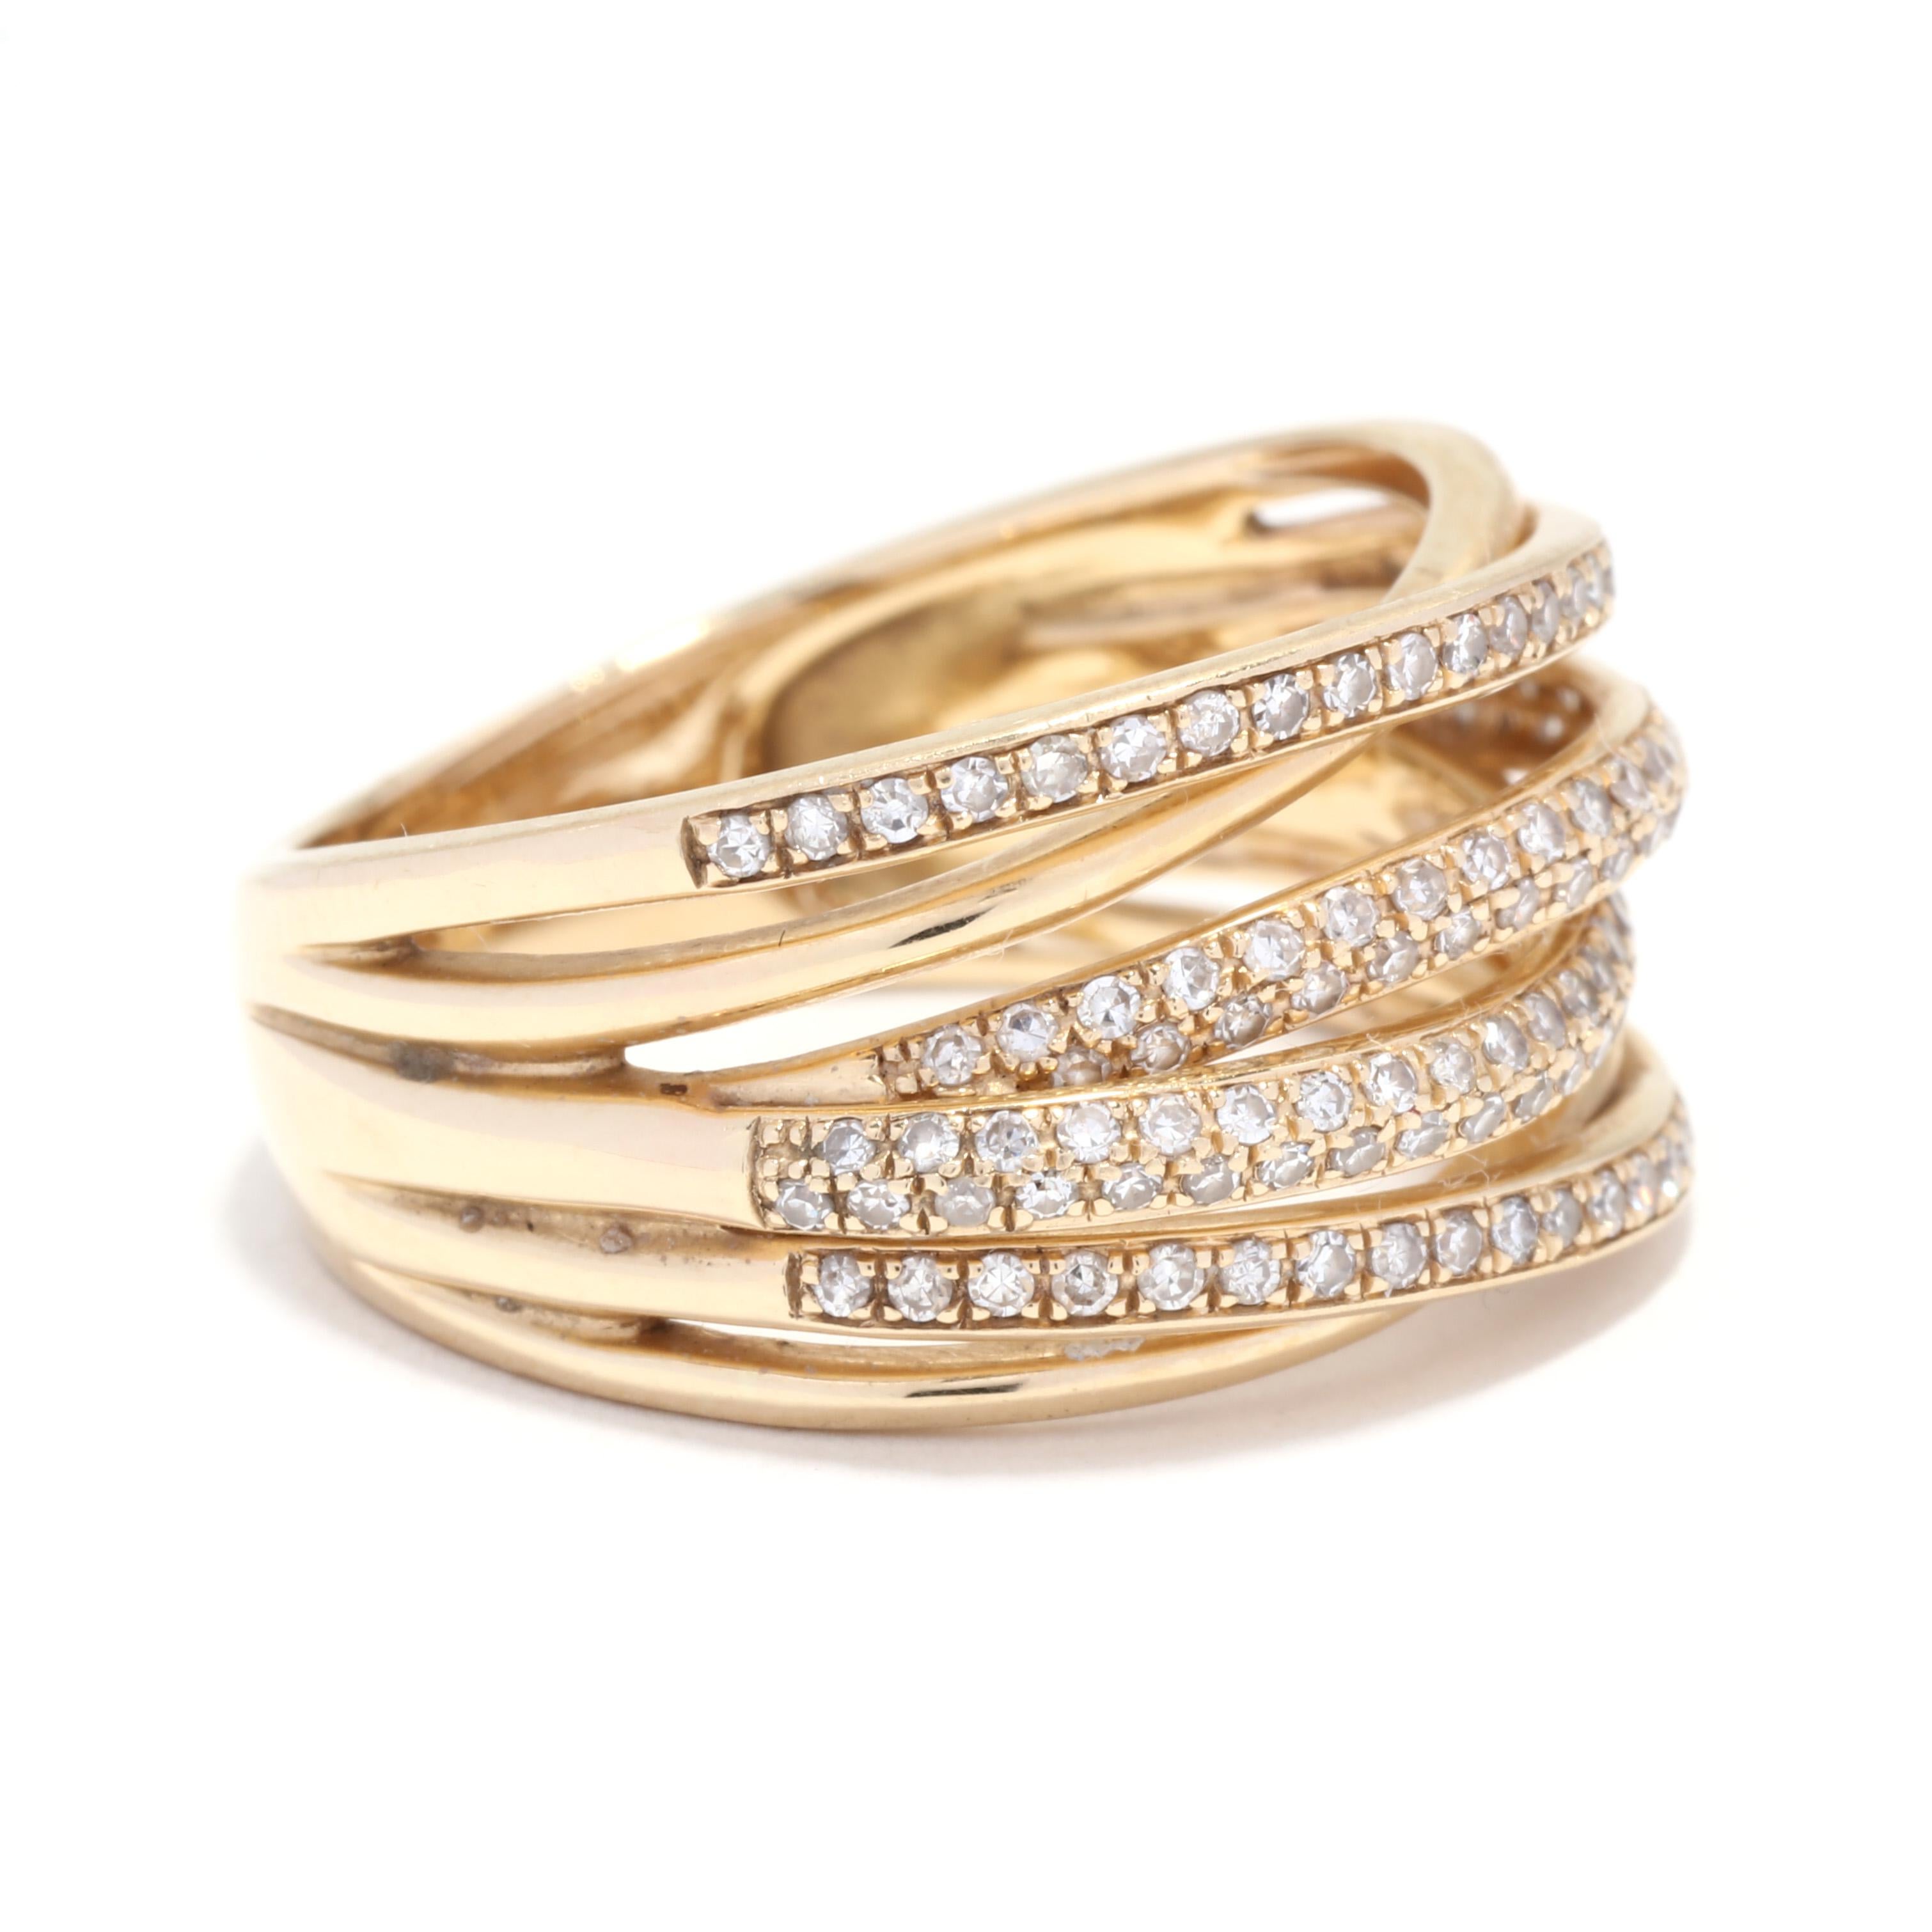 This Effy diamond crossover wide band ring is a stunning piece of jewelry that will add a touch of elegance and sophistication to any outfit. Made with 14K yellow gold, this ring is a size 7 and is perfect for everyday wear. The ring features a